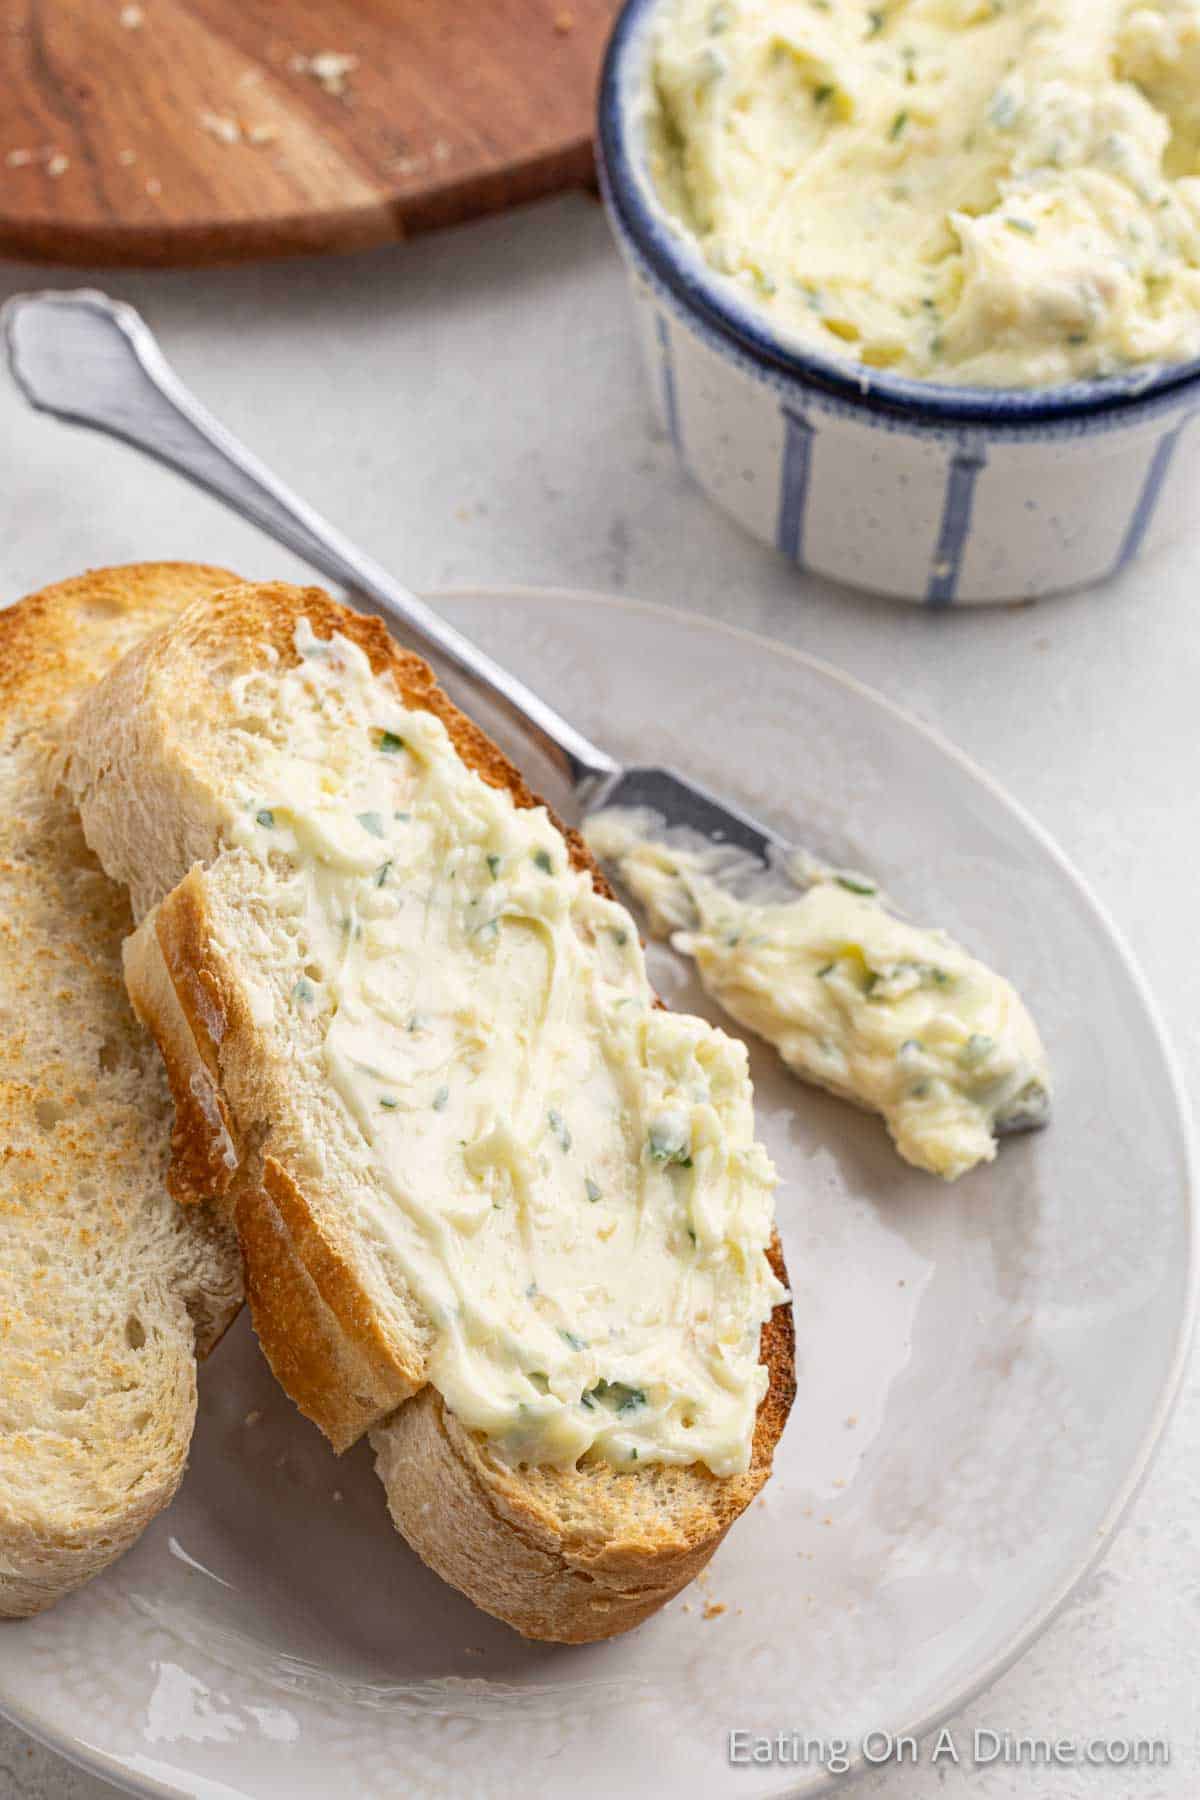 Garlic butter on a slice of bread